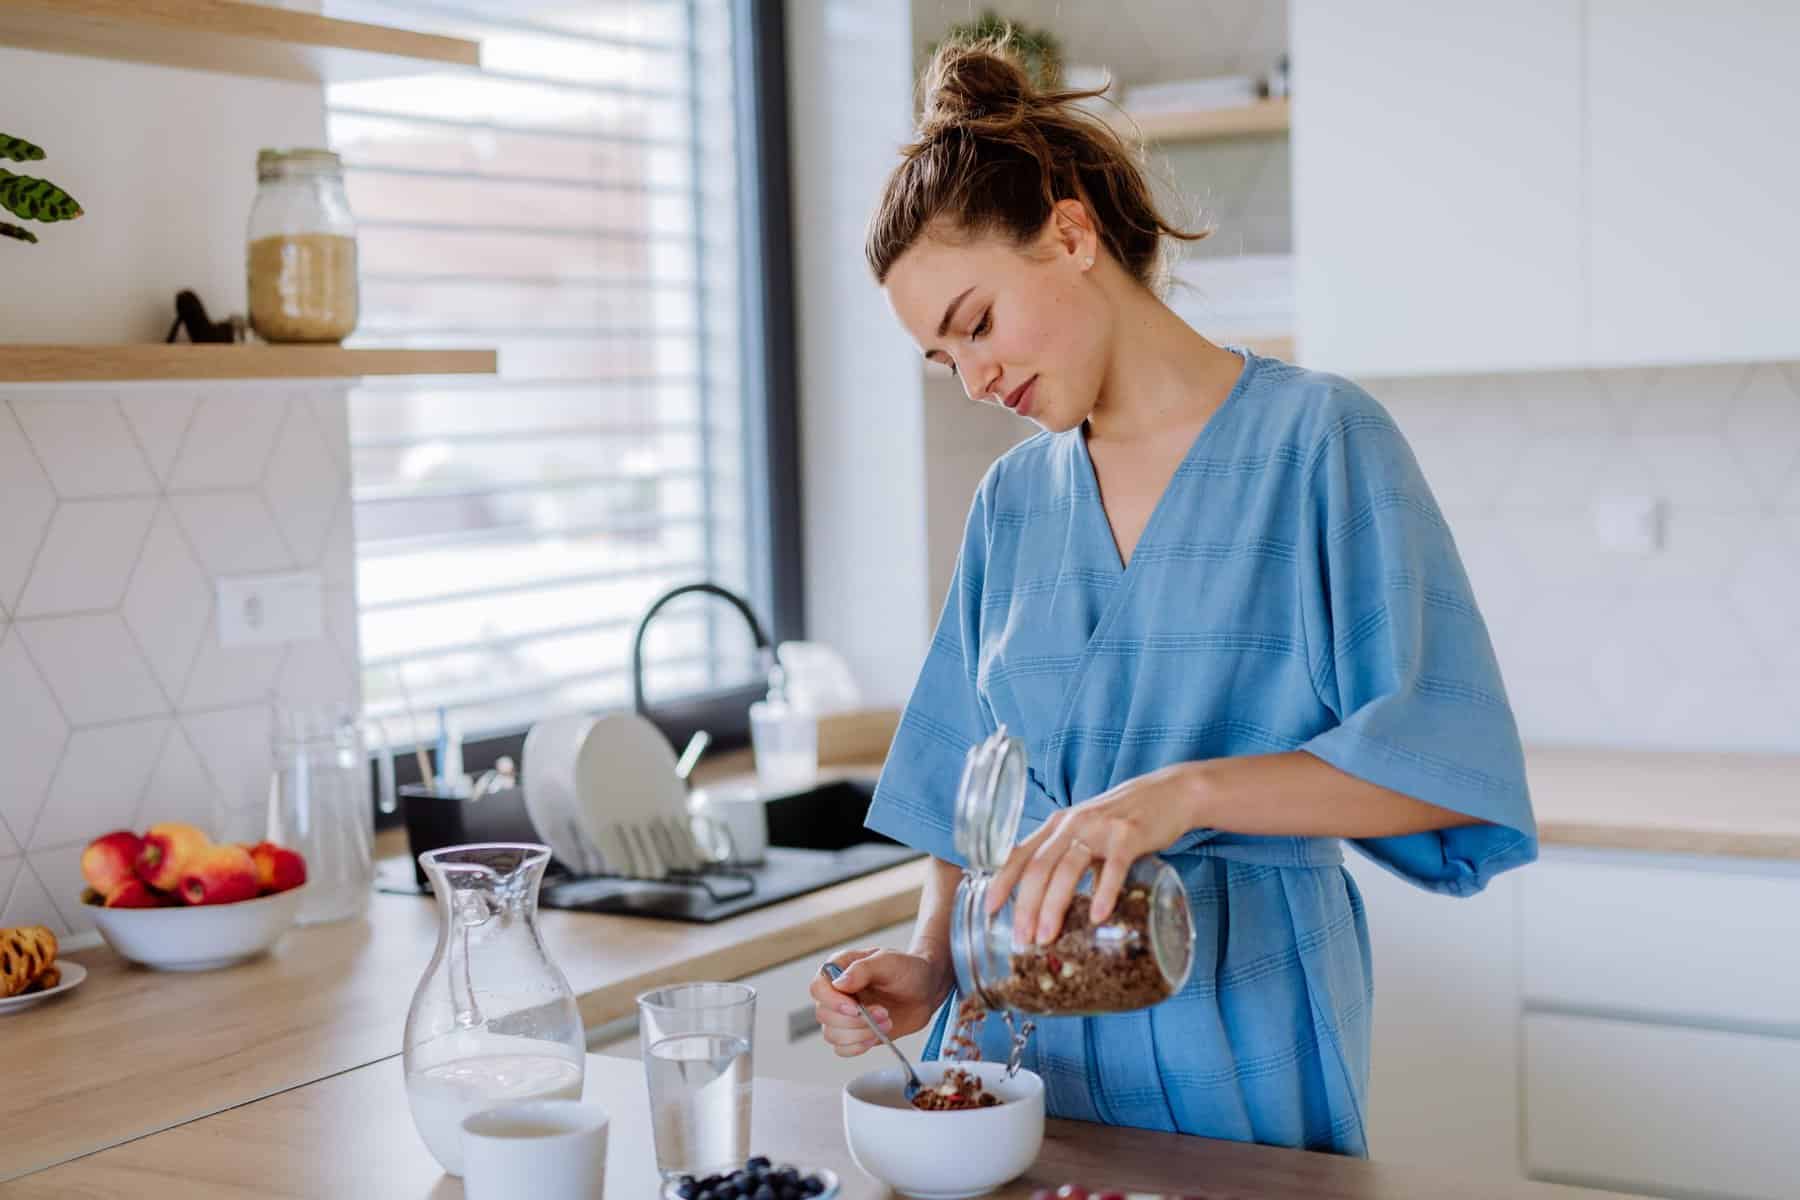 A woman pours whole-grain granola into a bowl as part of her MIND diet breakfast.